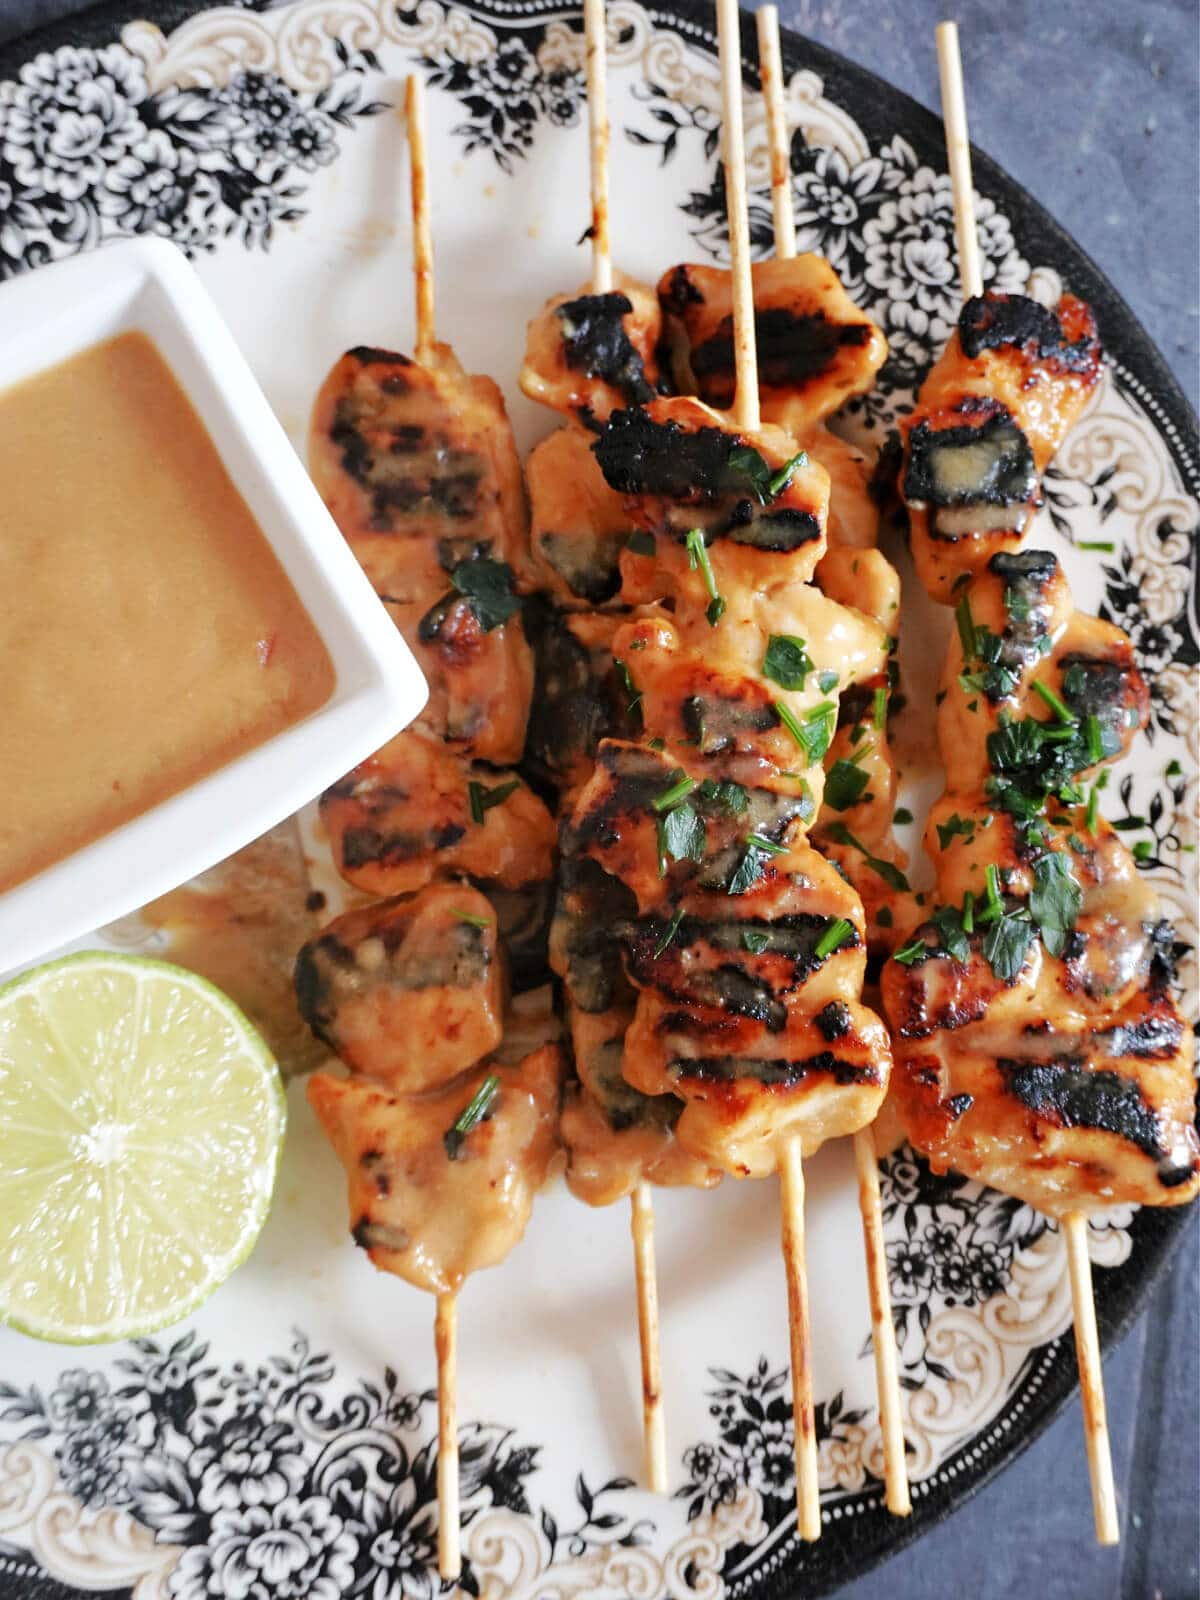 Overhead shot of grilled chicken skewers, a small bowl of peanut butter sauce, and half a lime on a white plate